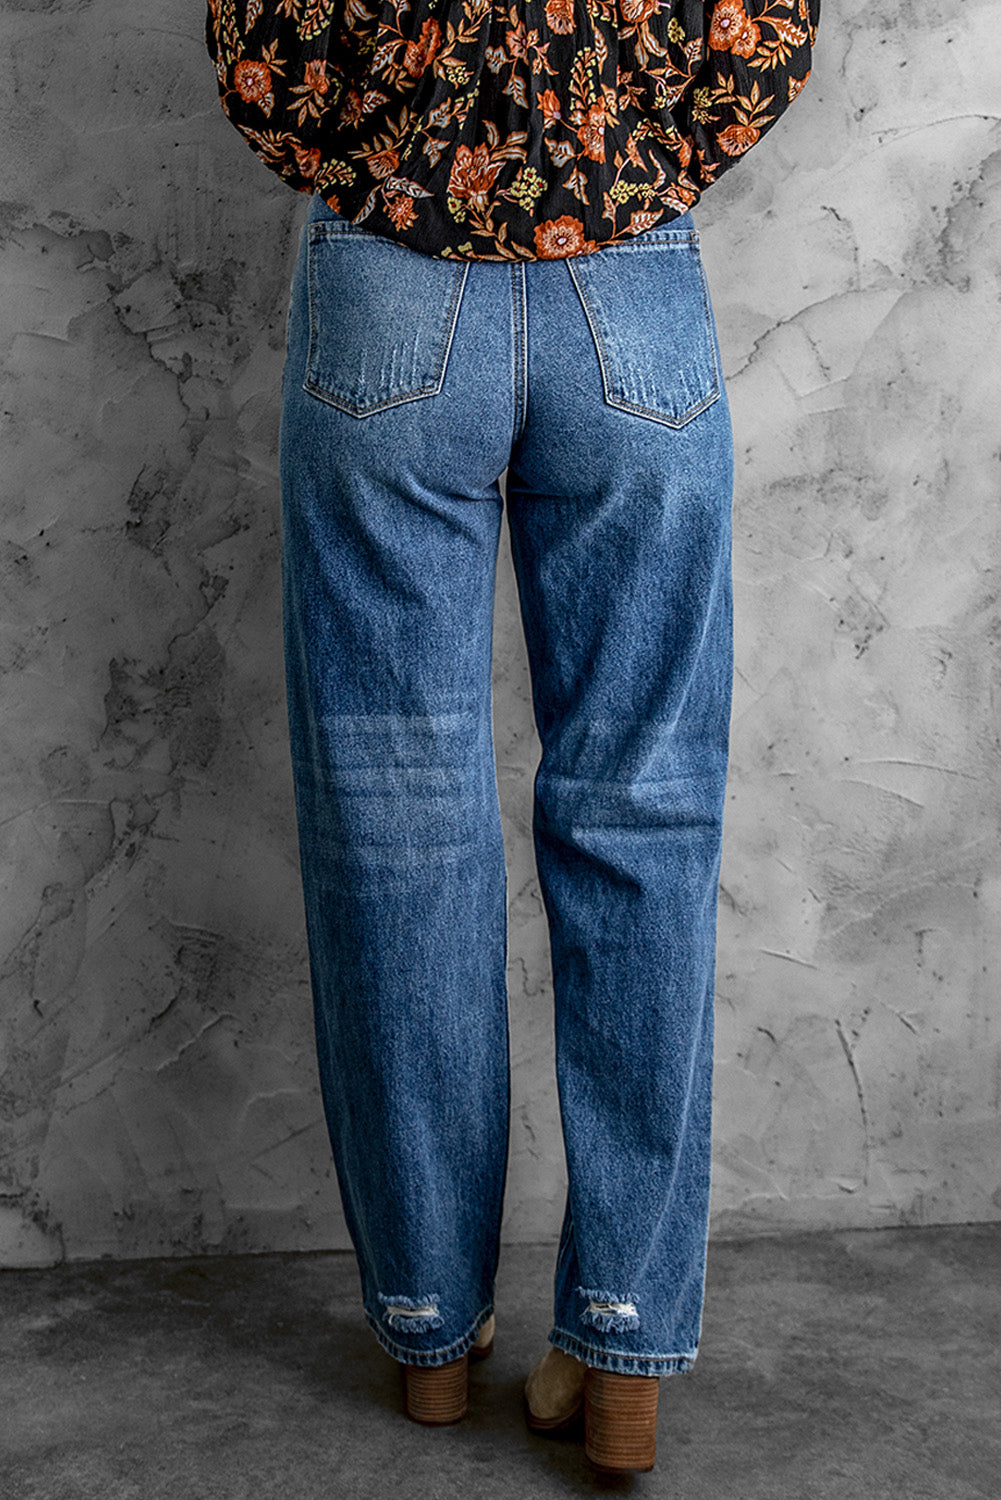 Distressed High Waist Jeans with Pockets - DromedarShop.com Online Boutique